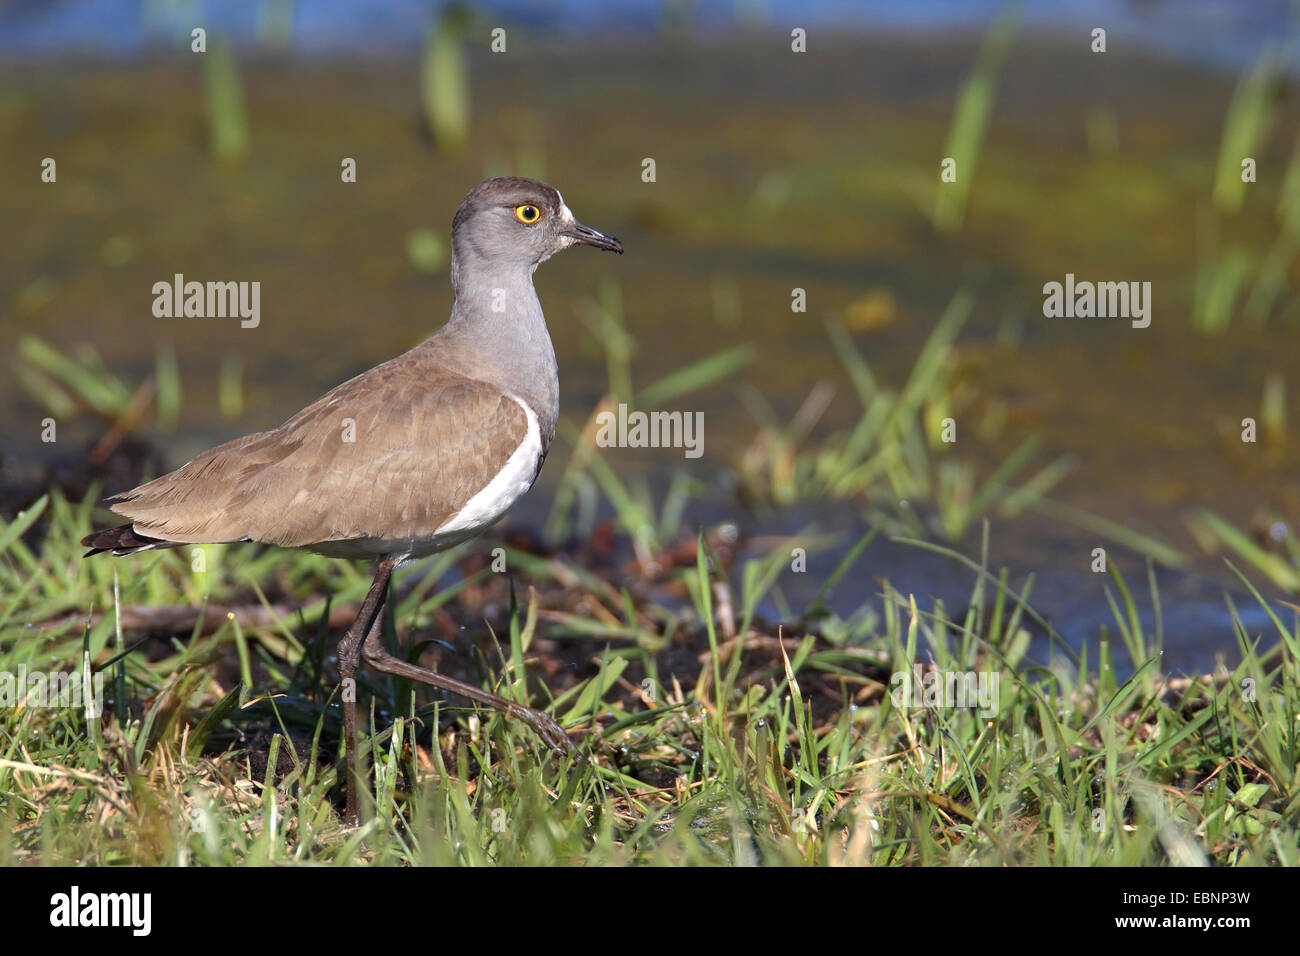 Senegal plover (Vanellus lugubris), stands in shallow water, South Africa, iSimangaliso Wetland Park Stock Photo